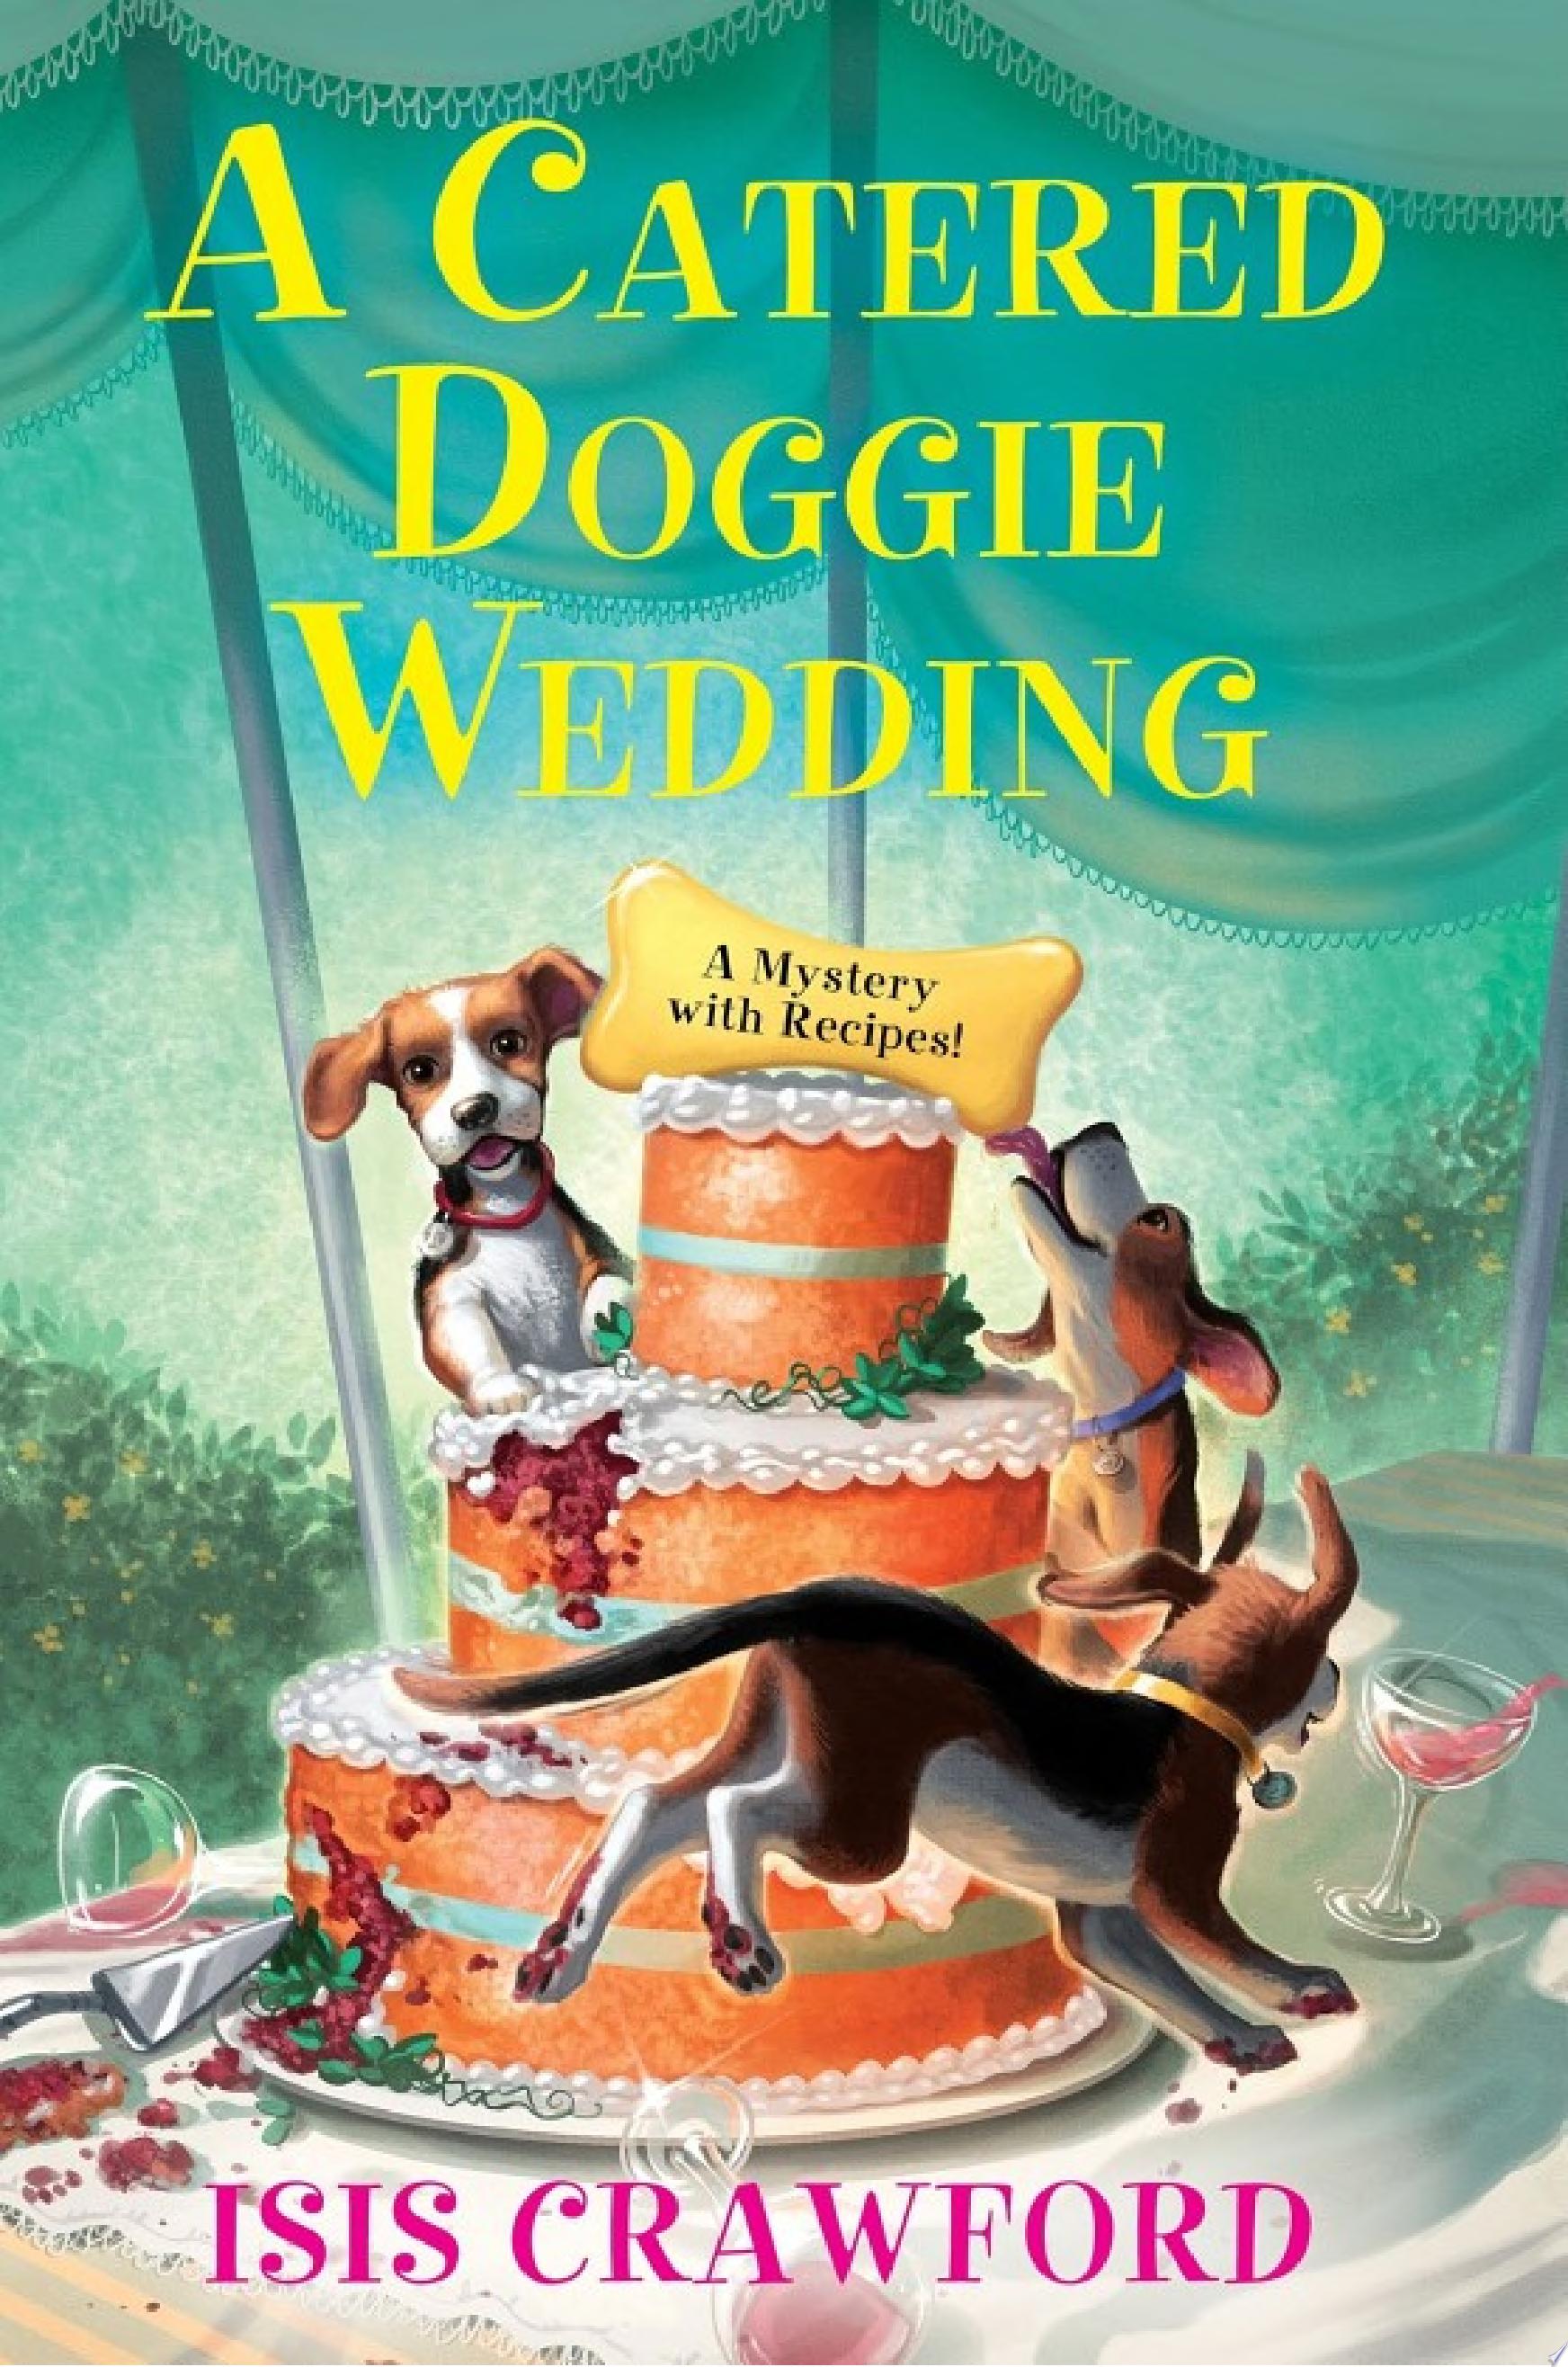 Image for "A Catered Doggie Wedding"